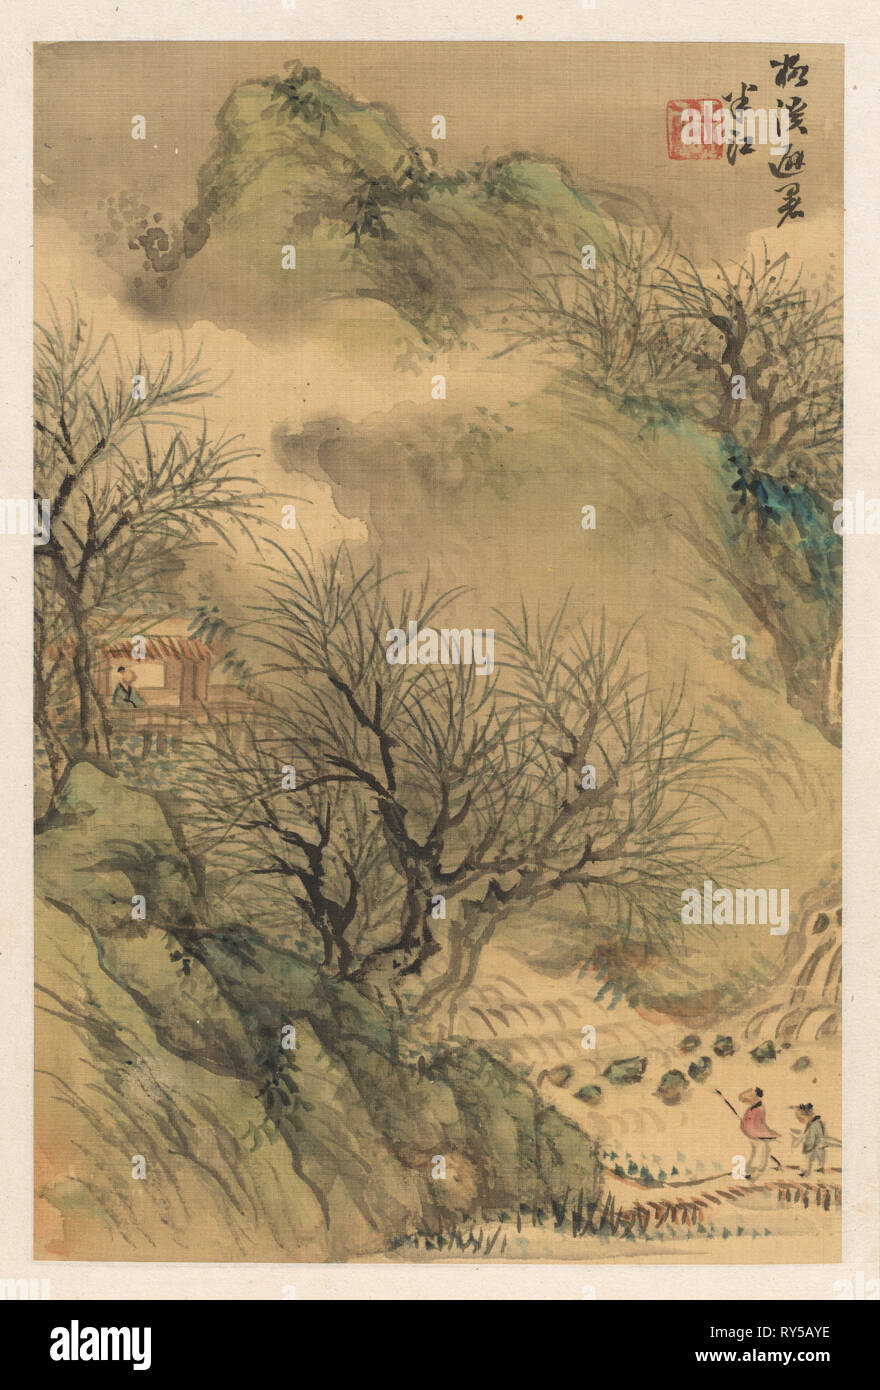 Summer Retreat, early 19th century. Hanko Okada (Japanese, 1782-1845). Album leaf, ink and color on ivory silk; sheet: 26.7 x 17.5 cm (10 1/2 x 6 7/8 in Stock Photo